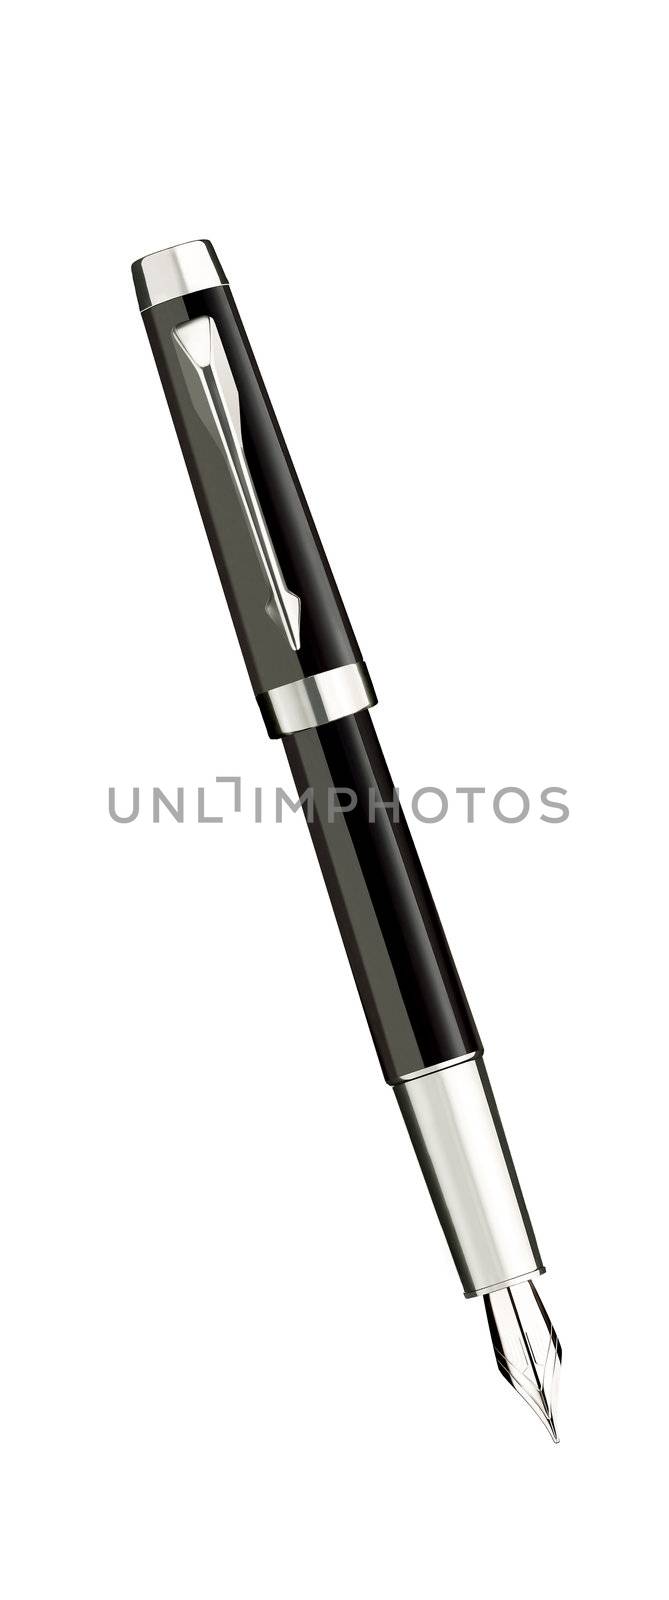 Fountain pen isolated by ozaiachin